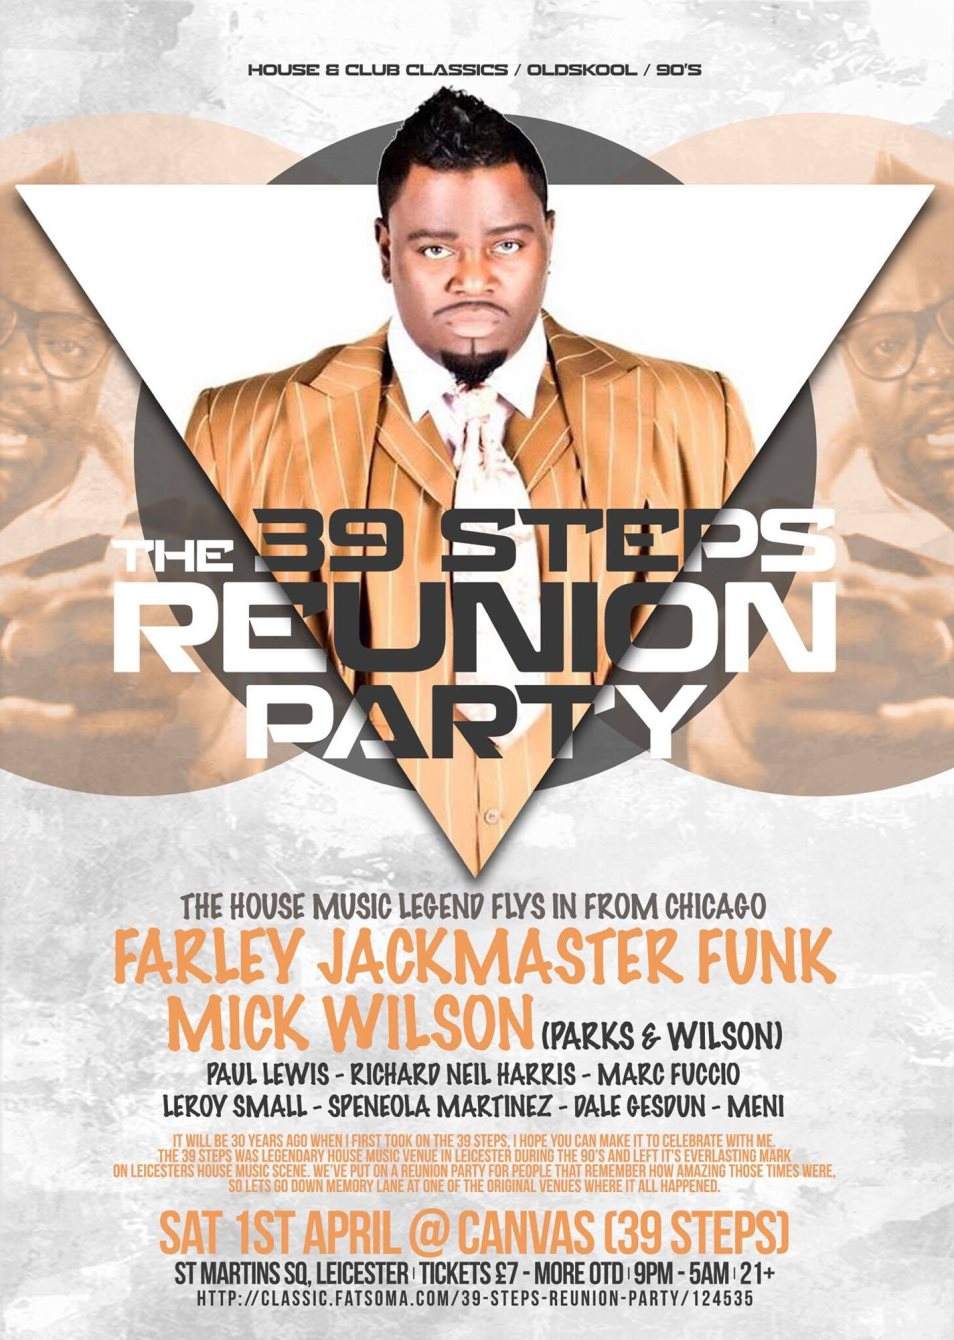 The 39 Steps Reunion Party with Farley Jackmaster Funk - フライヤー表